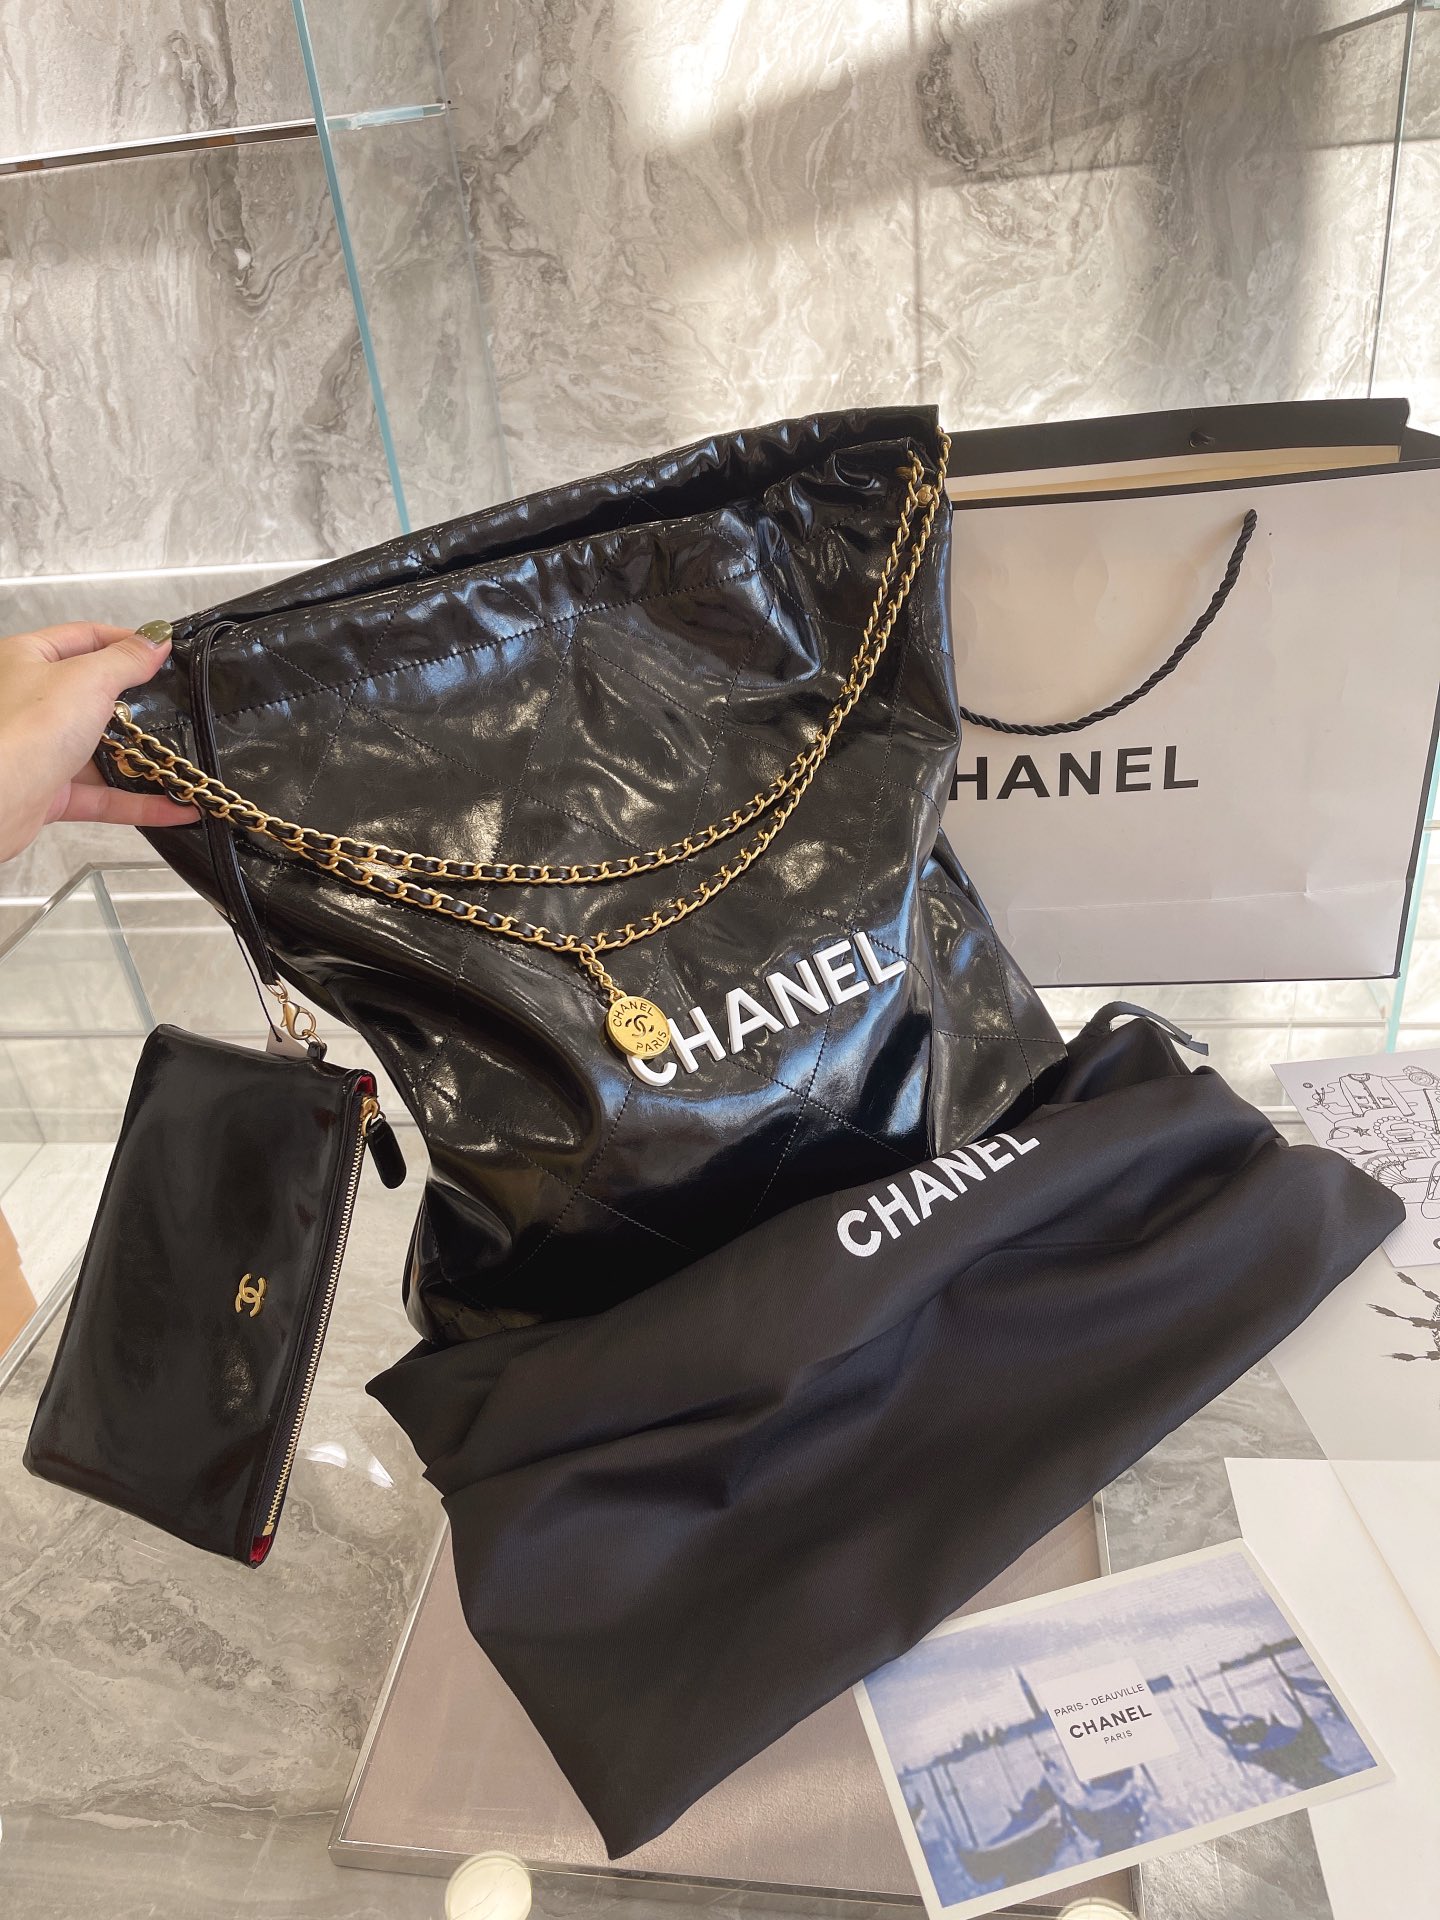 What makes a Chanel or Louis Vuitton bag so expensive? Are they worth the  money? - Quora